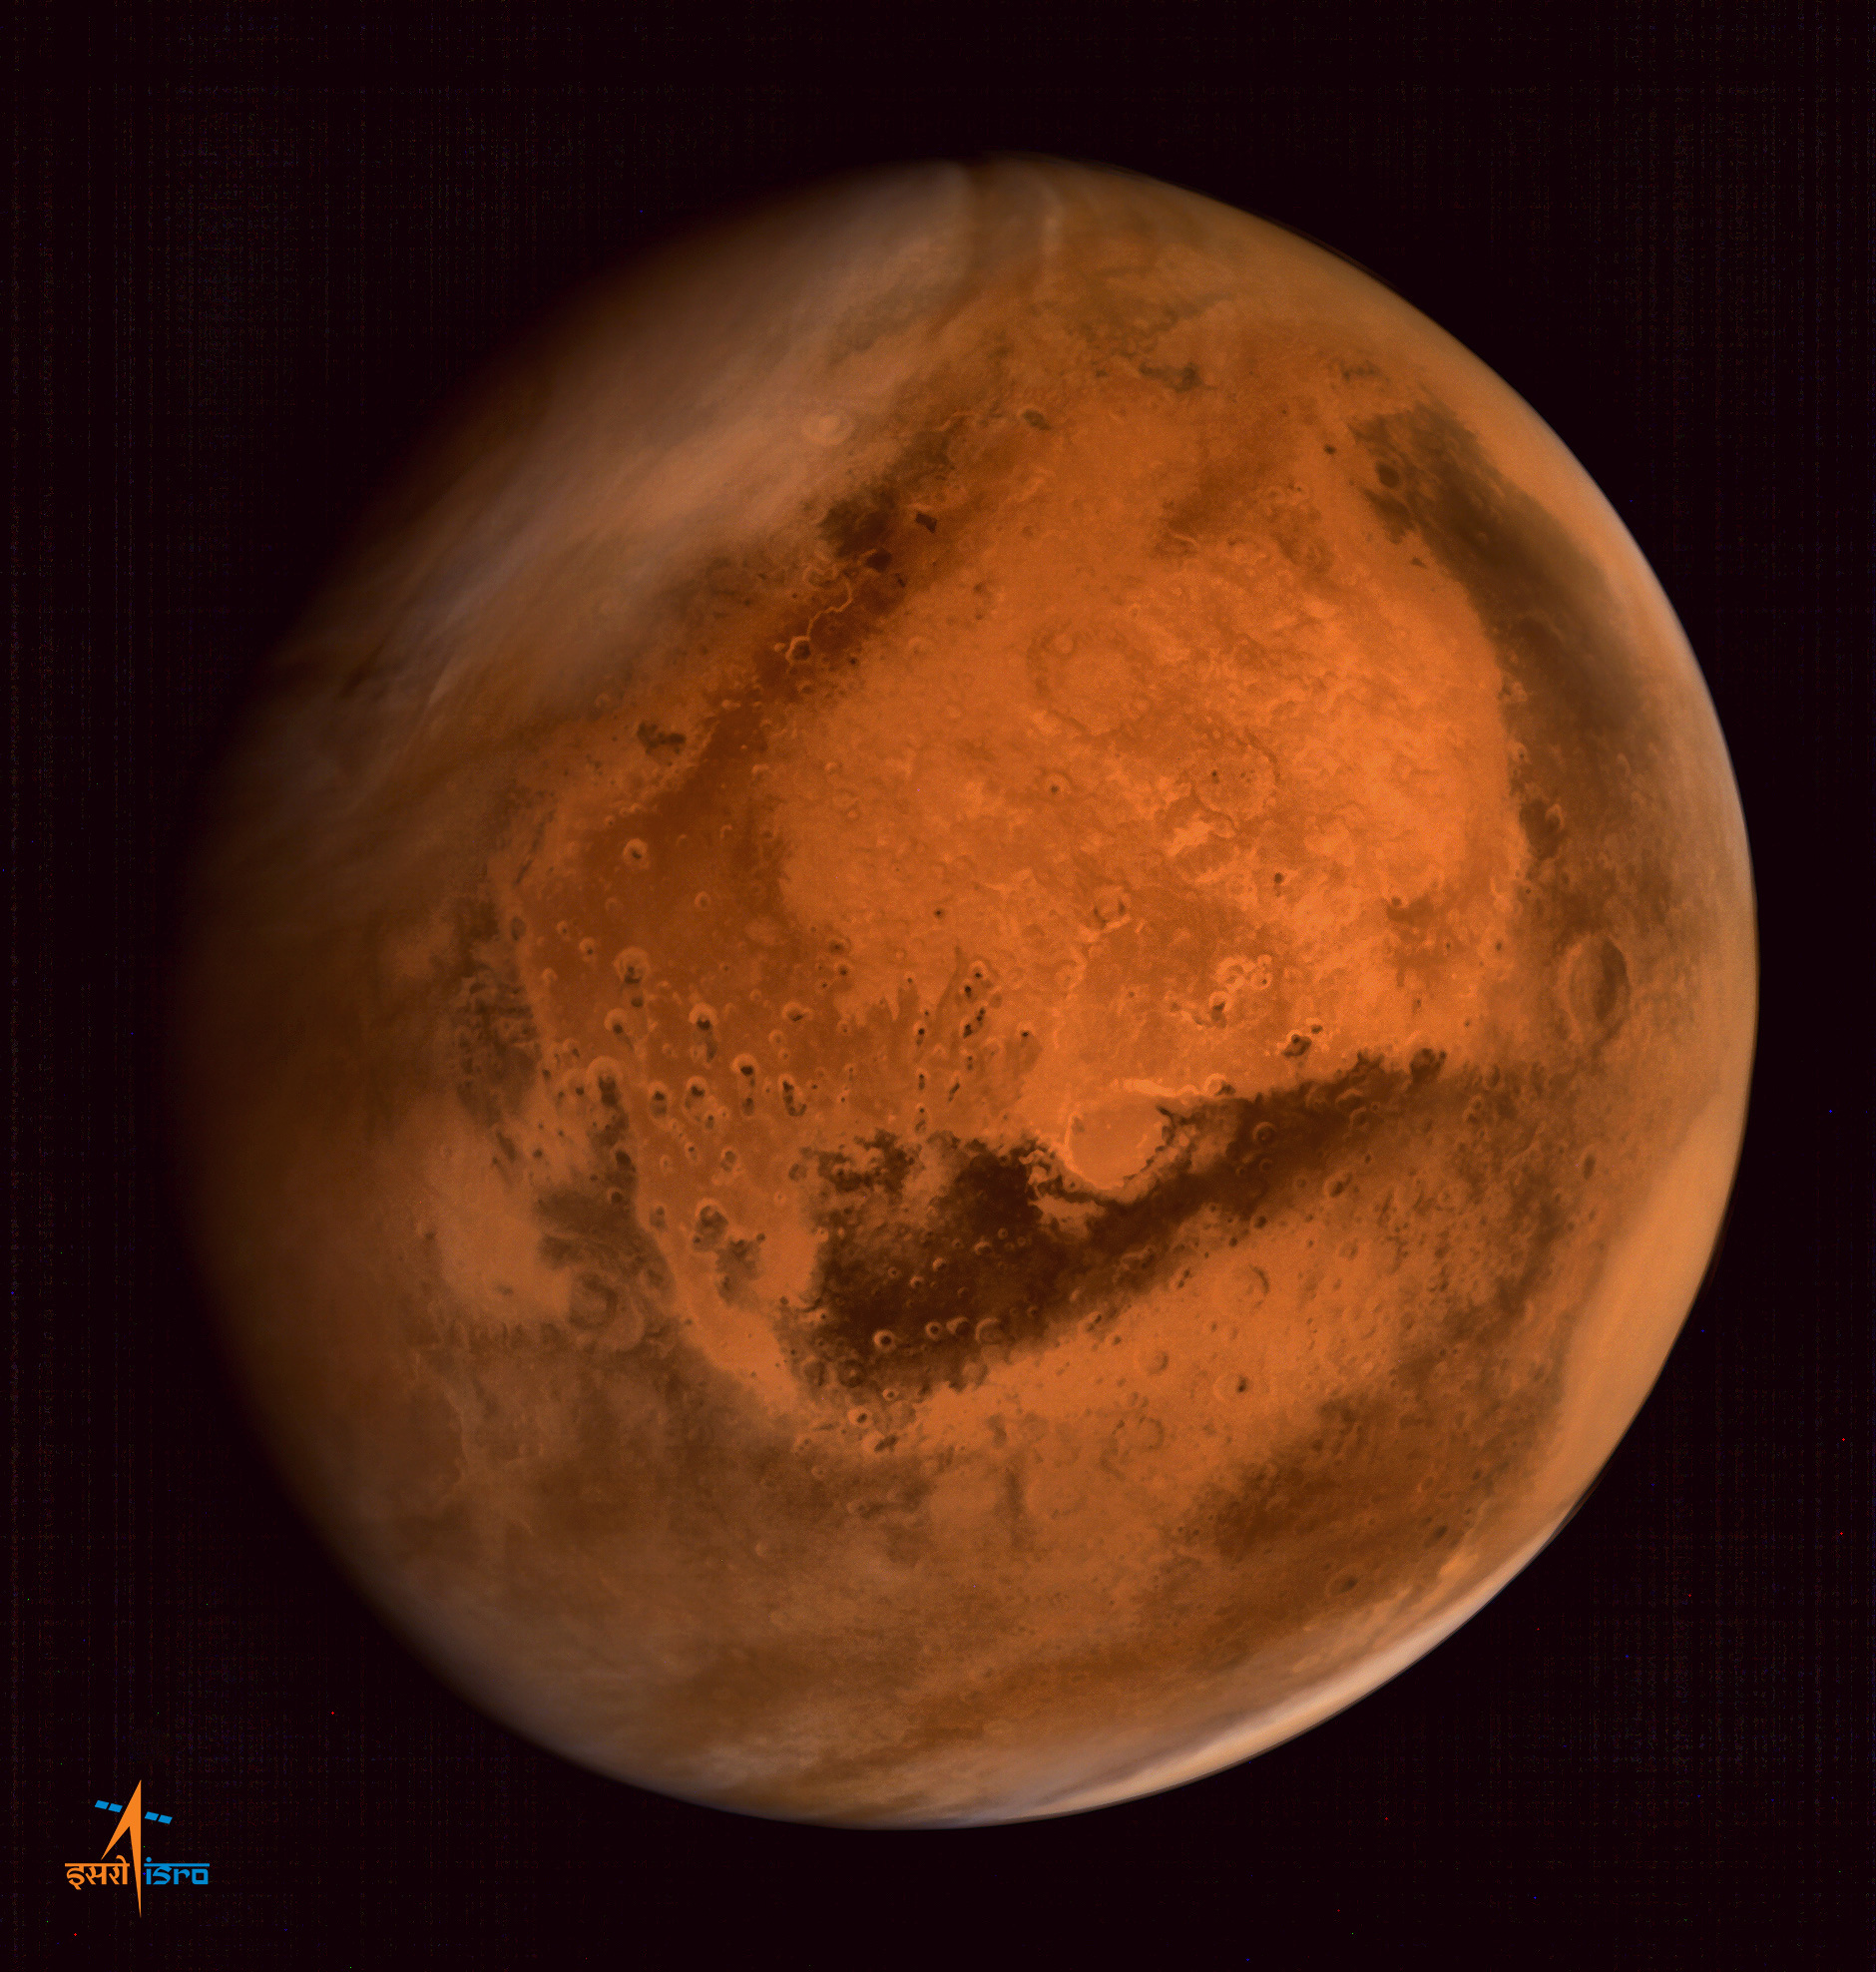 ISRO's Mars Orbiter Mission captures spectacular portrait of the Red Planet and swirling dust storms with the on-board Mars Color Camera from an altitude of 74500 km on Sept. 28, 2014.  Credit: ISRO